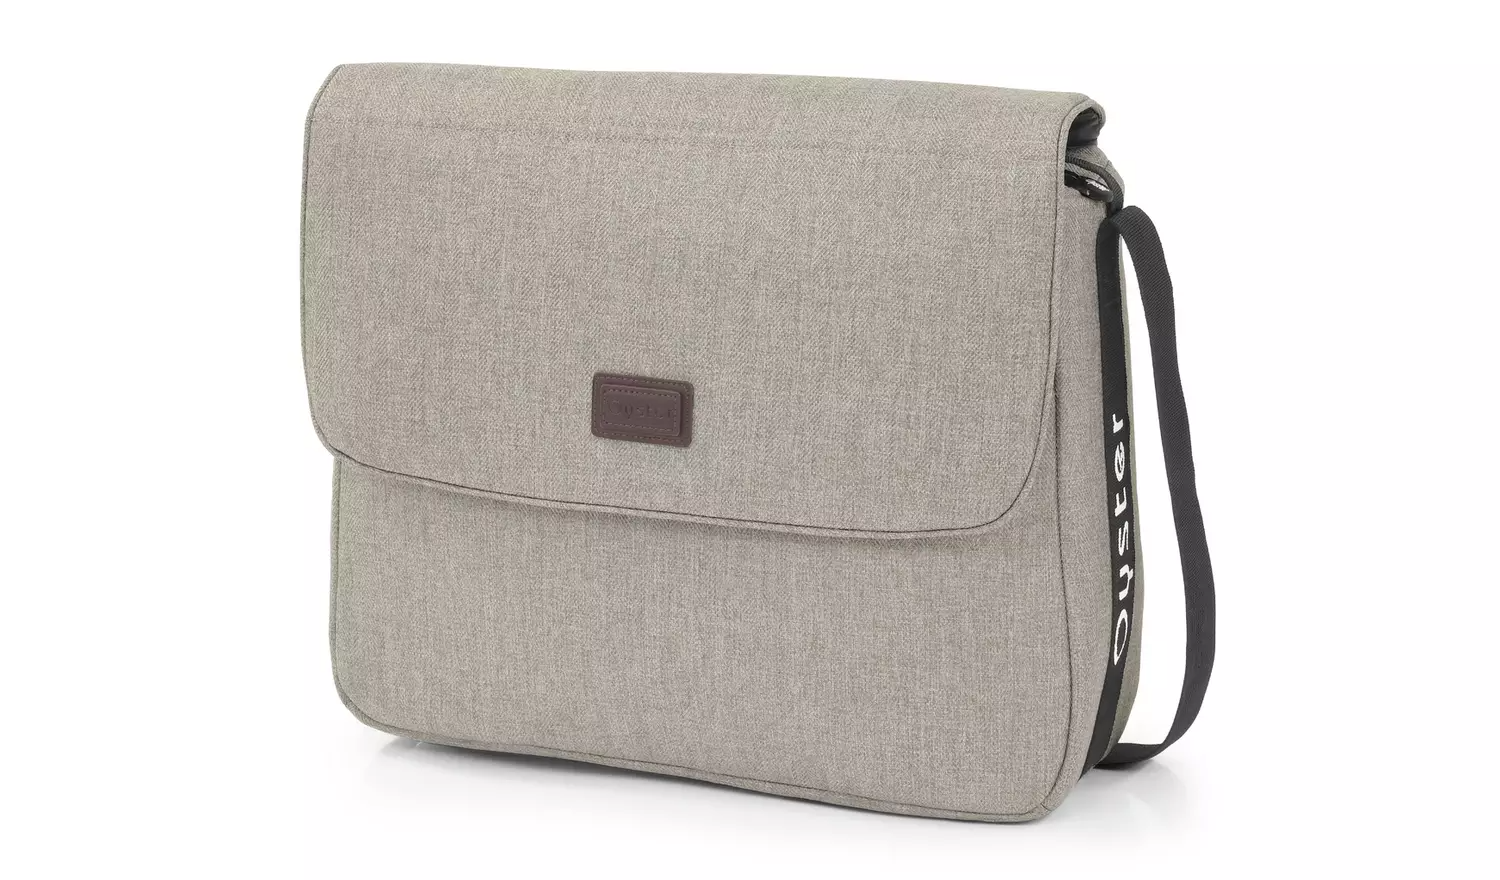 Oyster 3 Changing Bag – Pebble